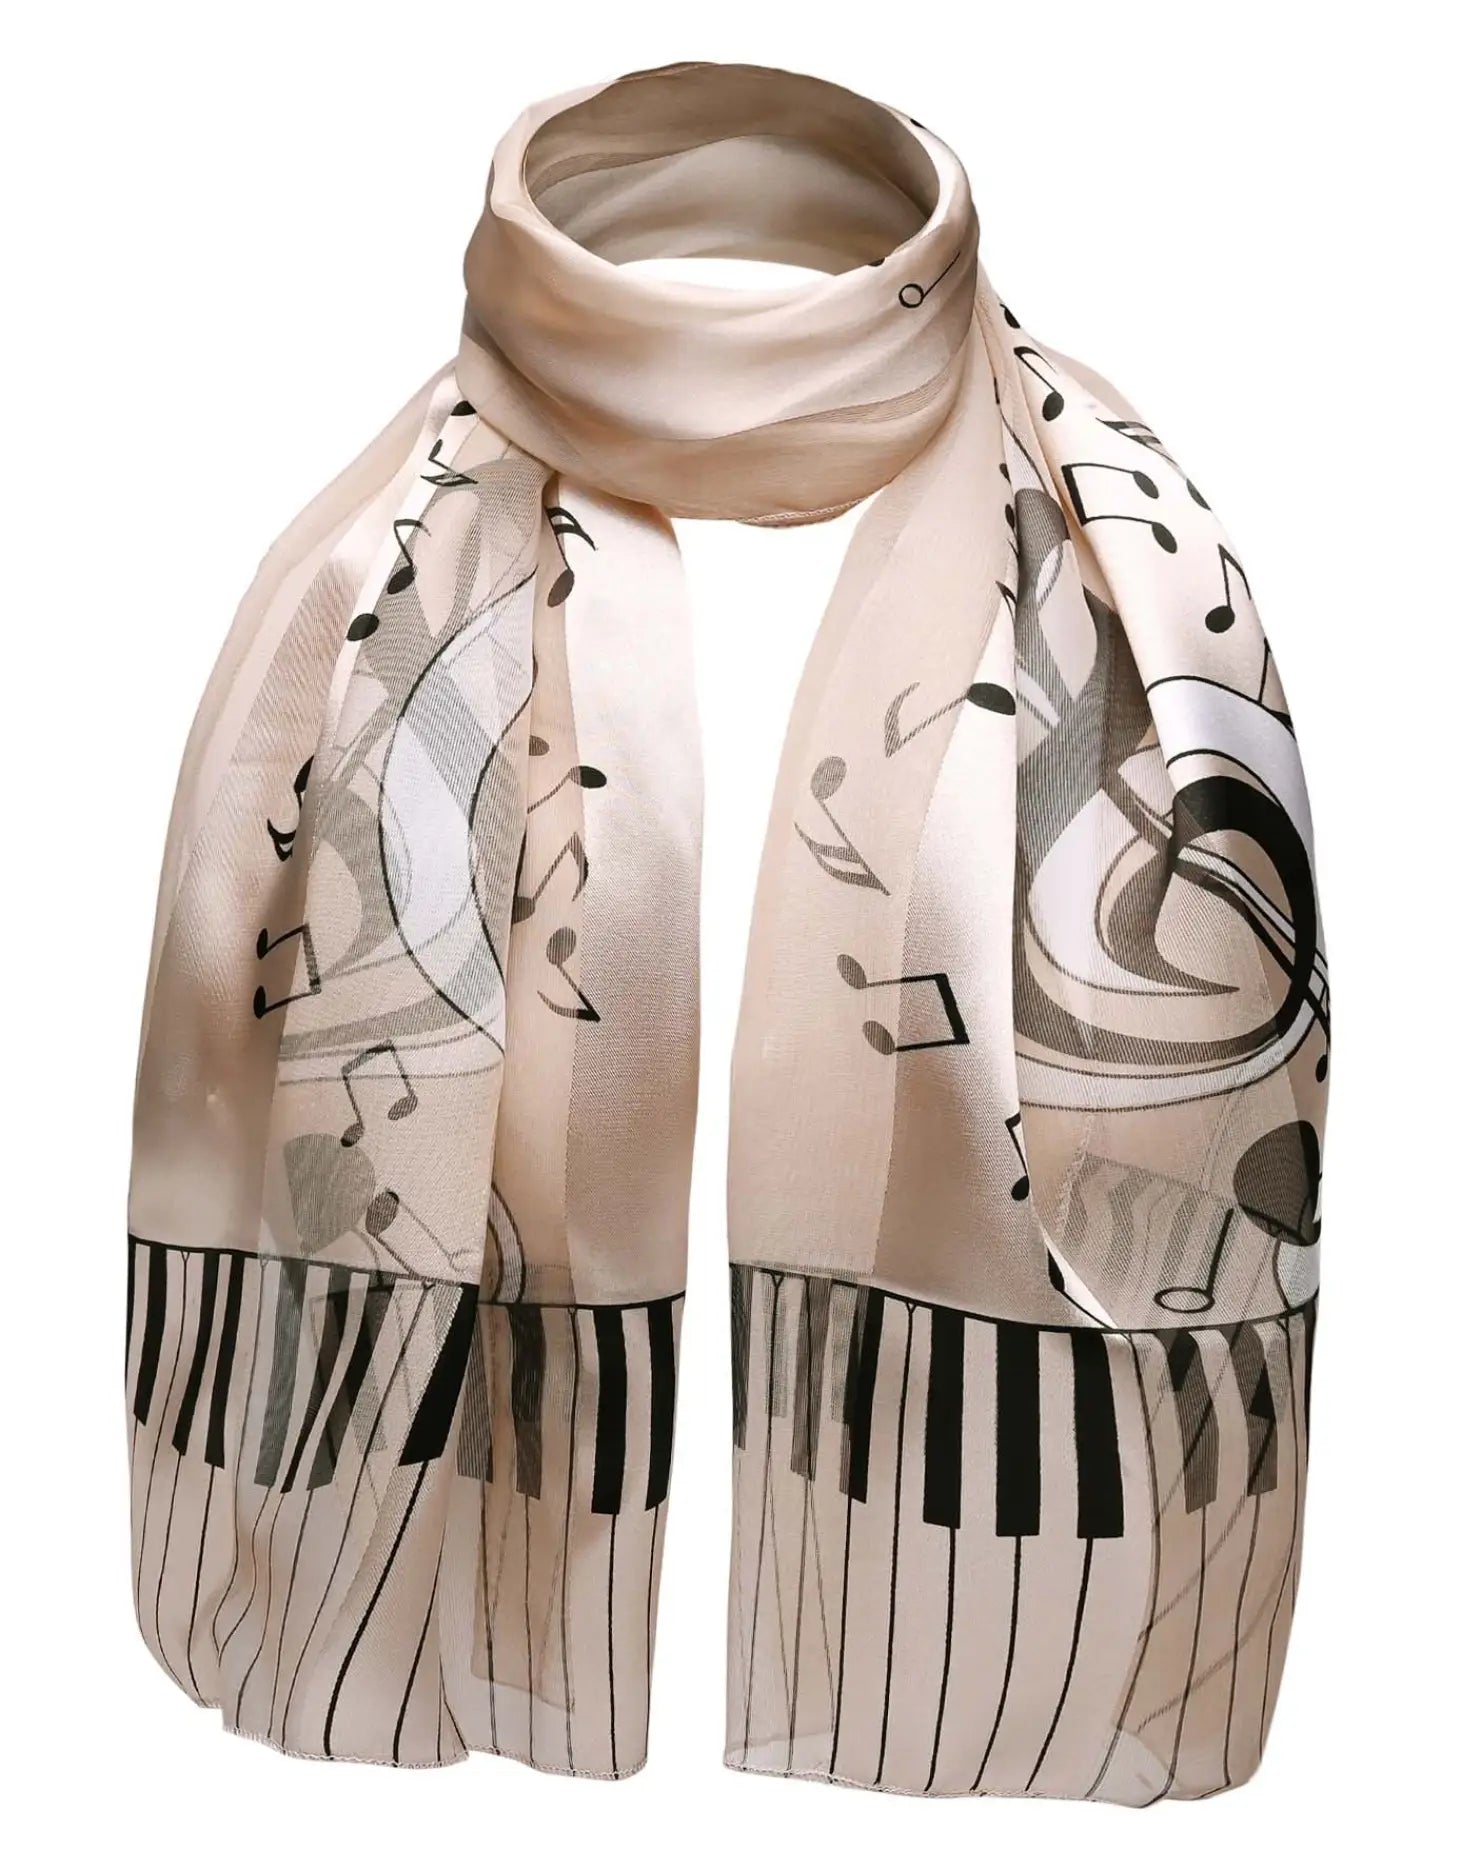 Unisex piano clef satin stripe scarf with music notes